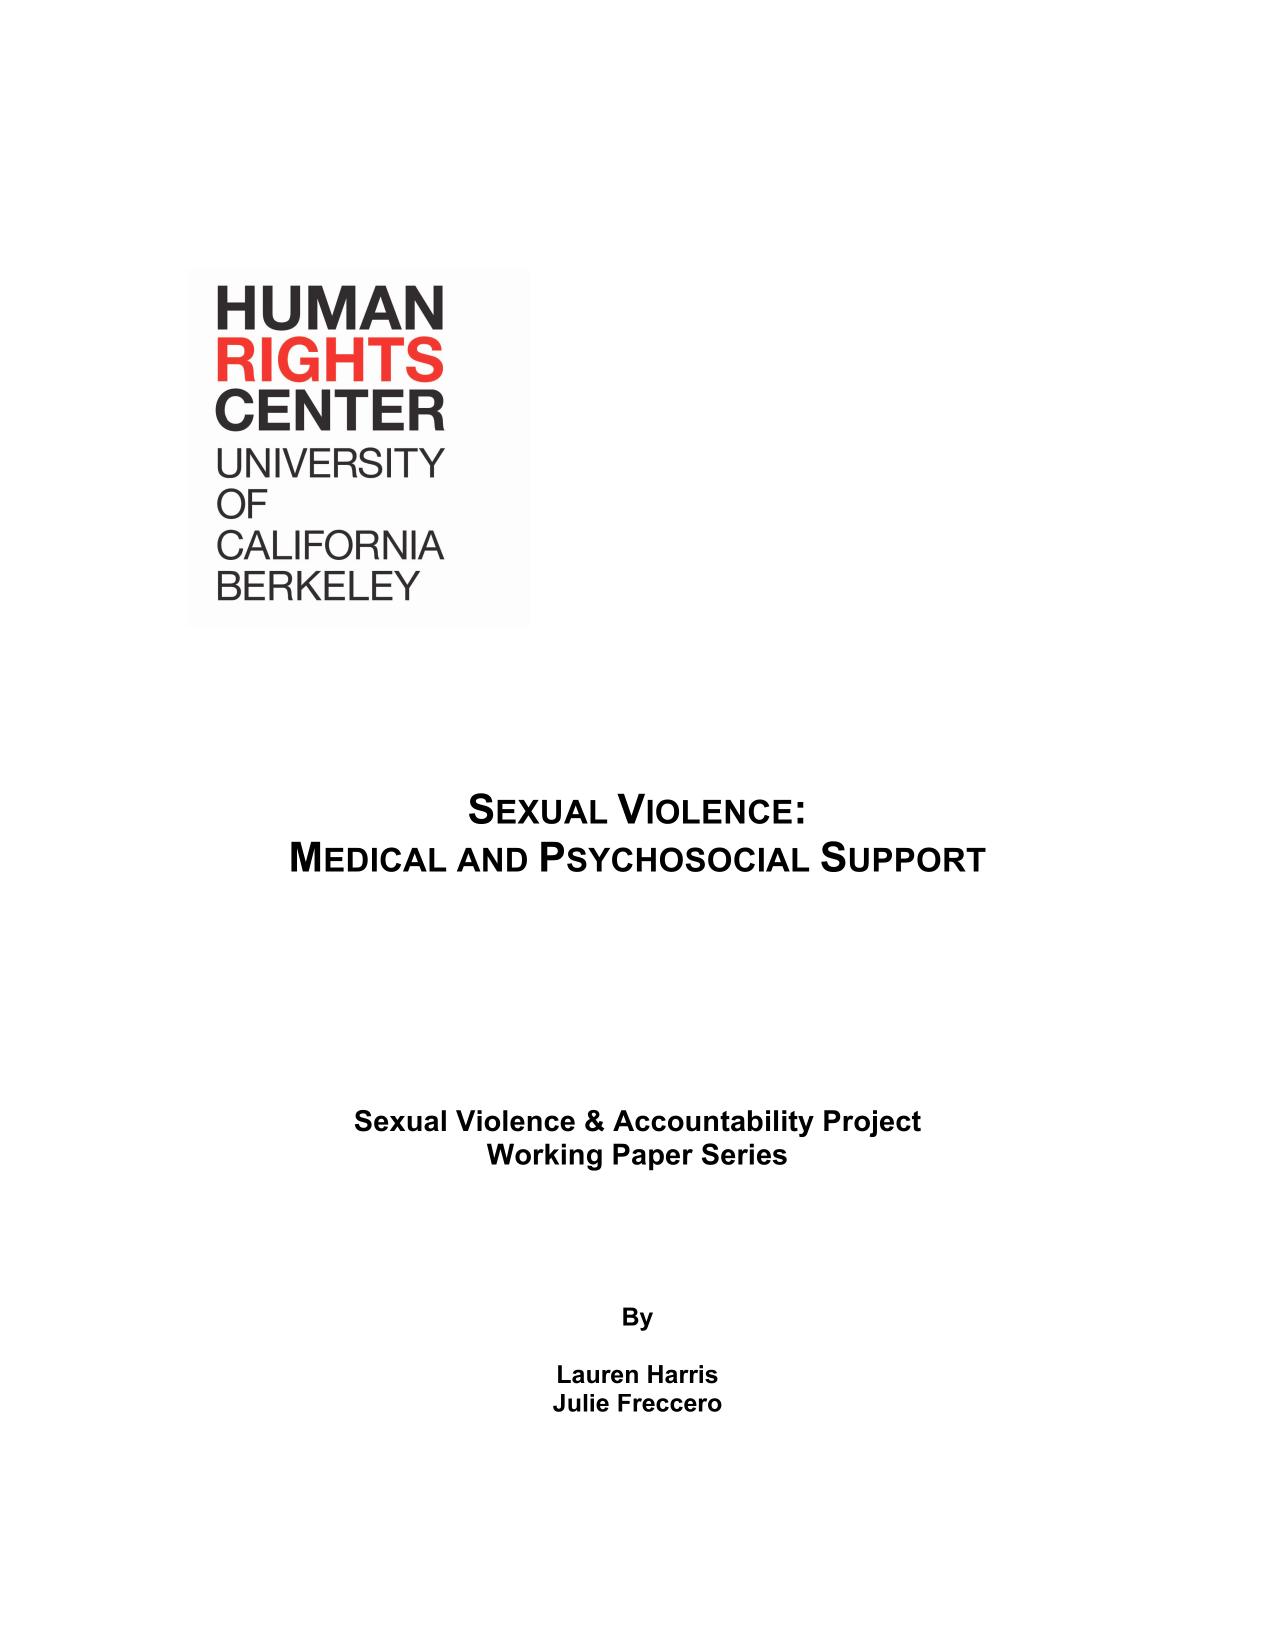 Sexual Violence- Medical and Psychosocial Support